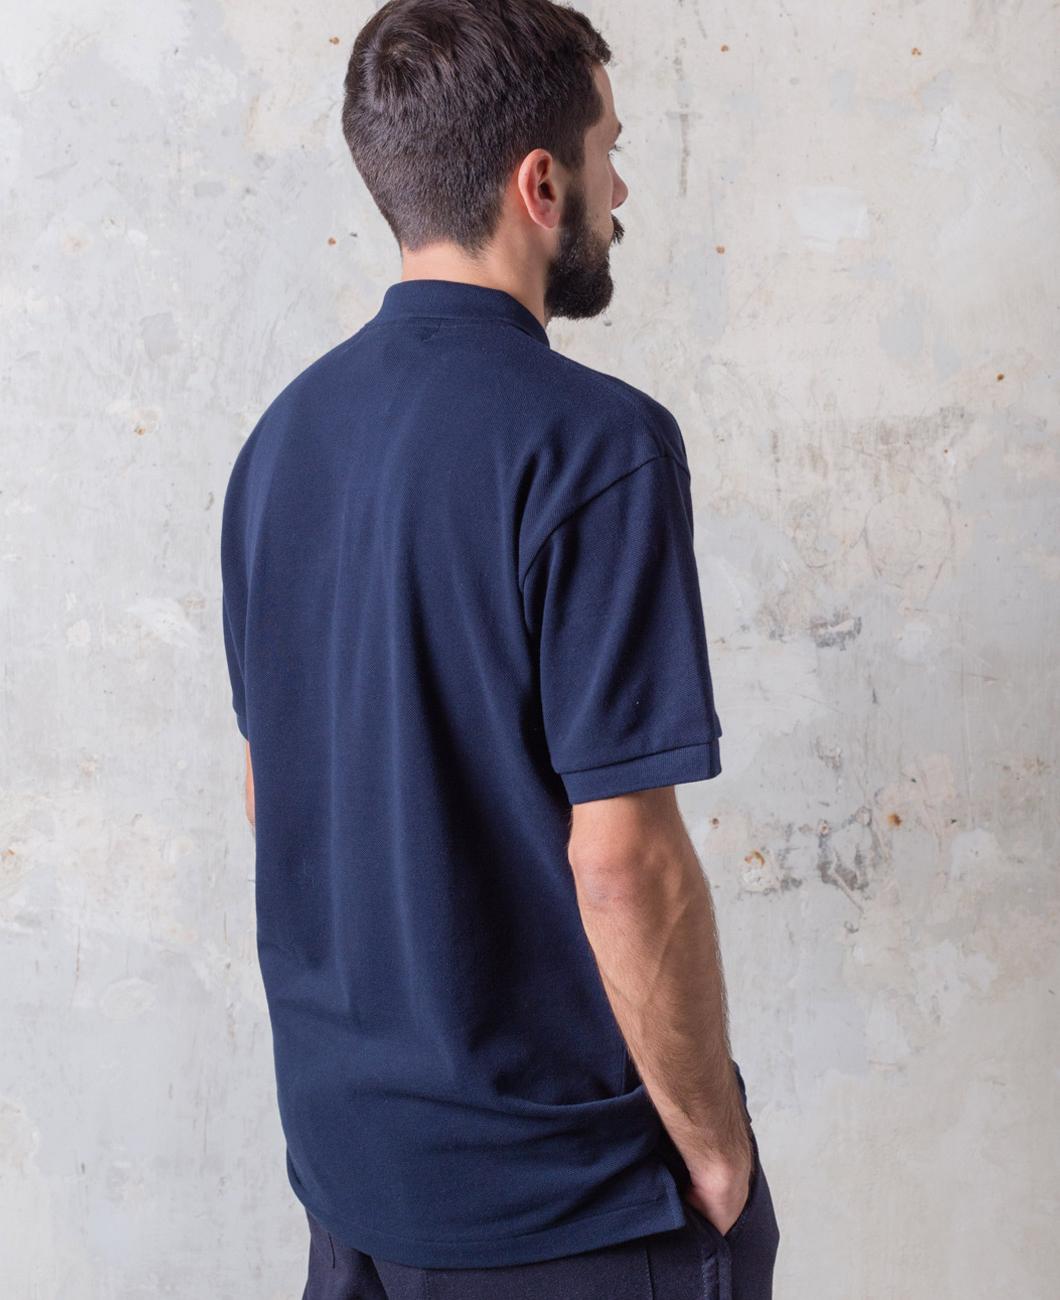  PLAY RED HEART POLO NAVY